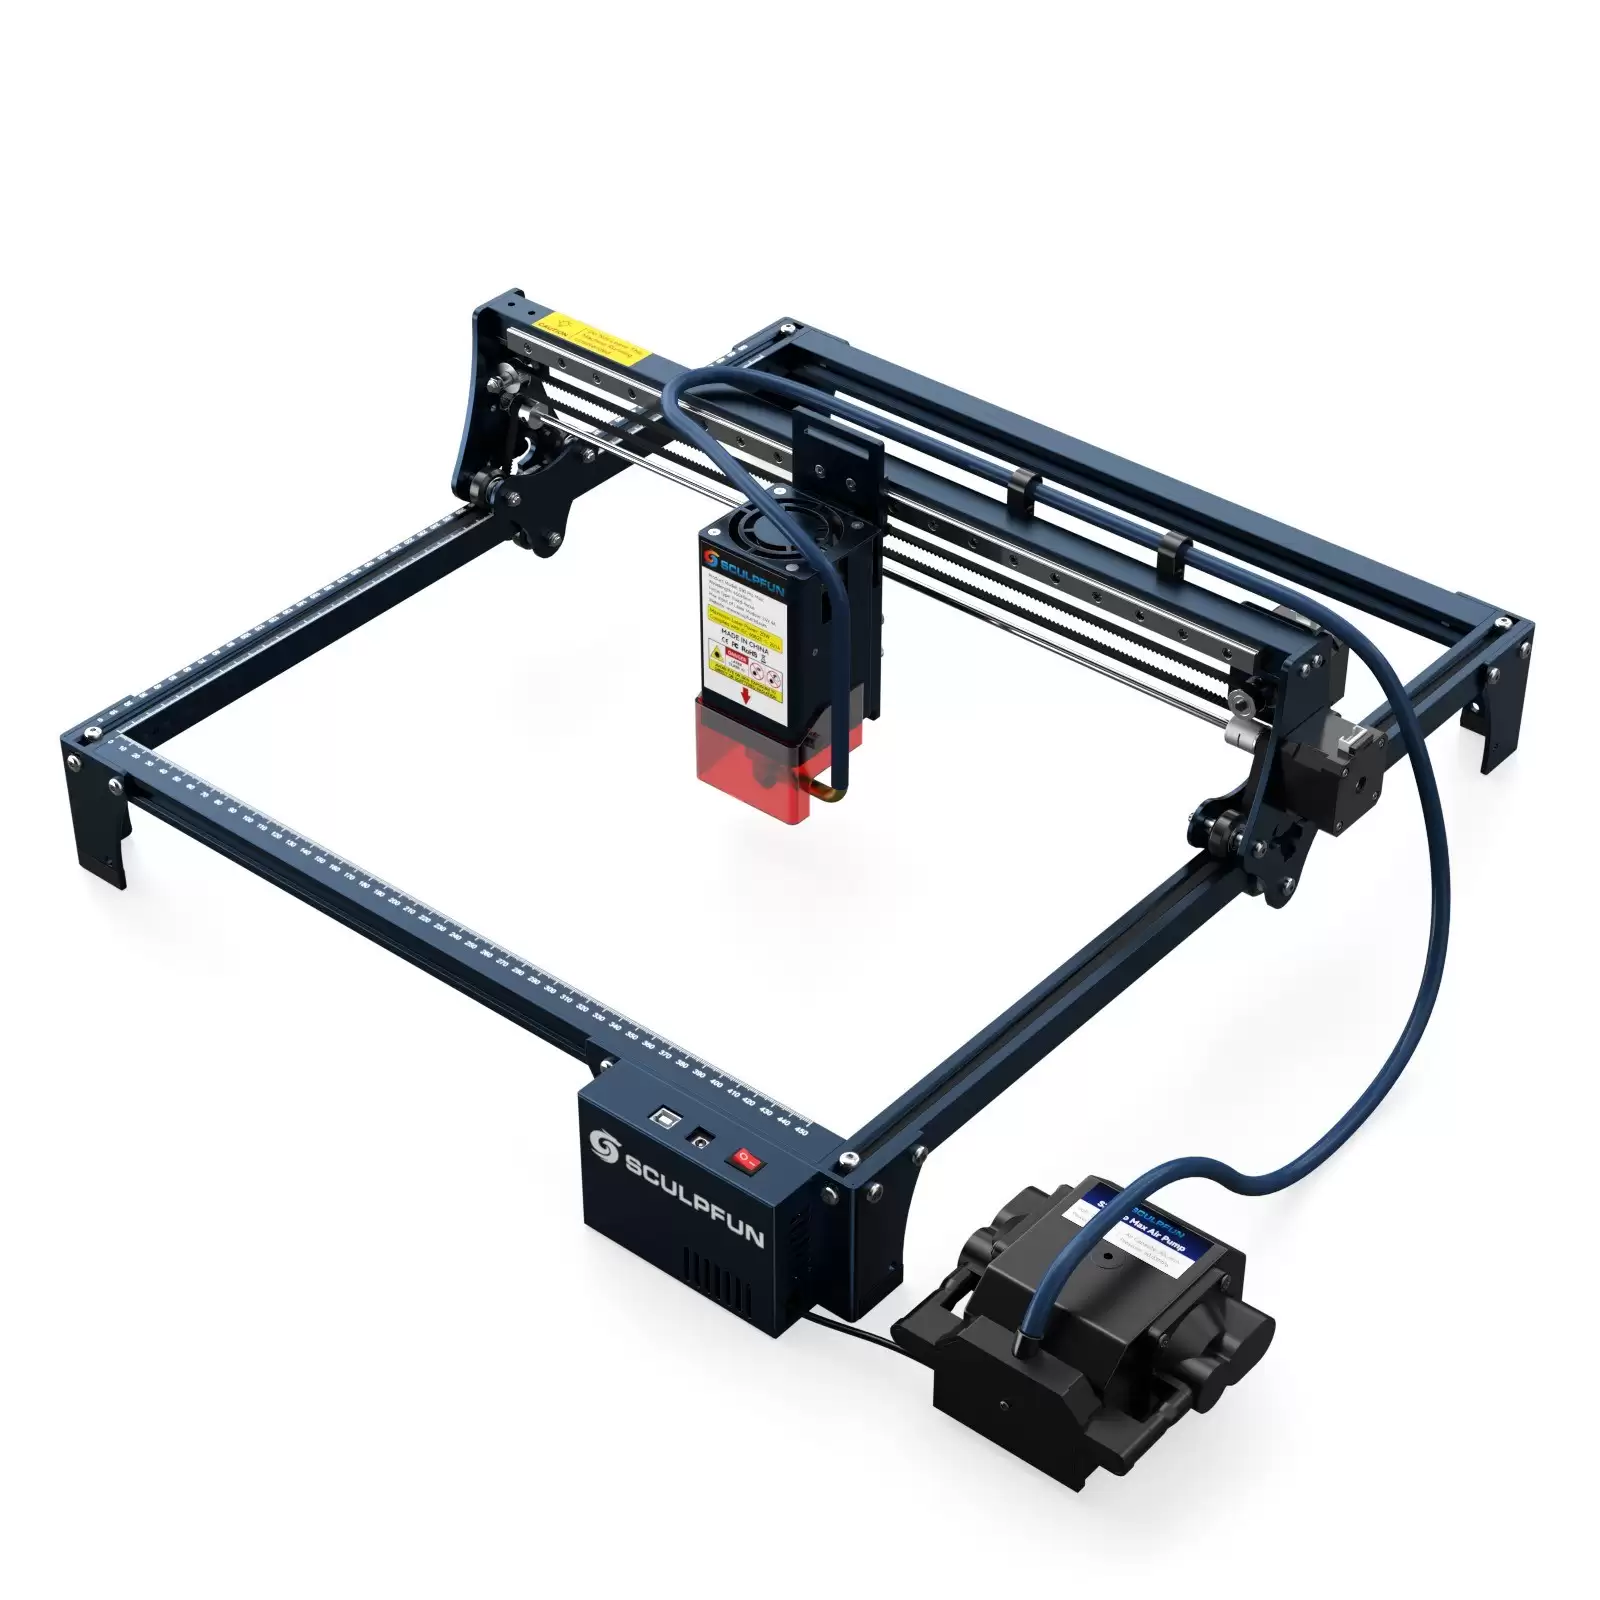 Order In Just $775 Sculpfun S30 Pro Max 20w Laser Engraver With Automatic Air-assist System Using This Tomtop Discount Code